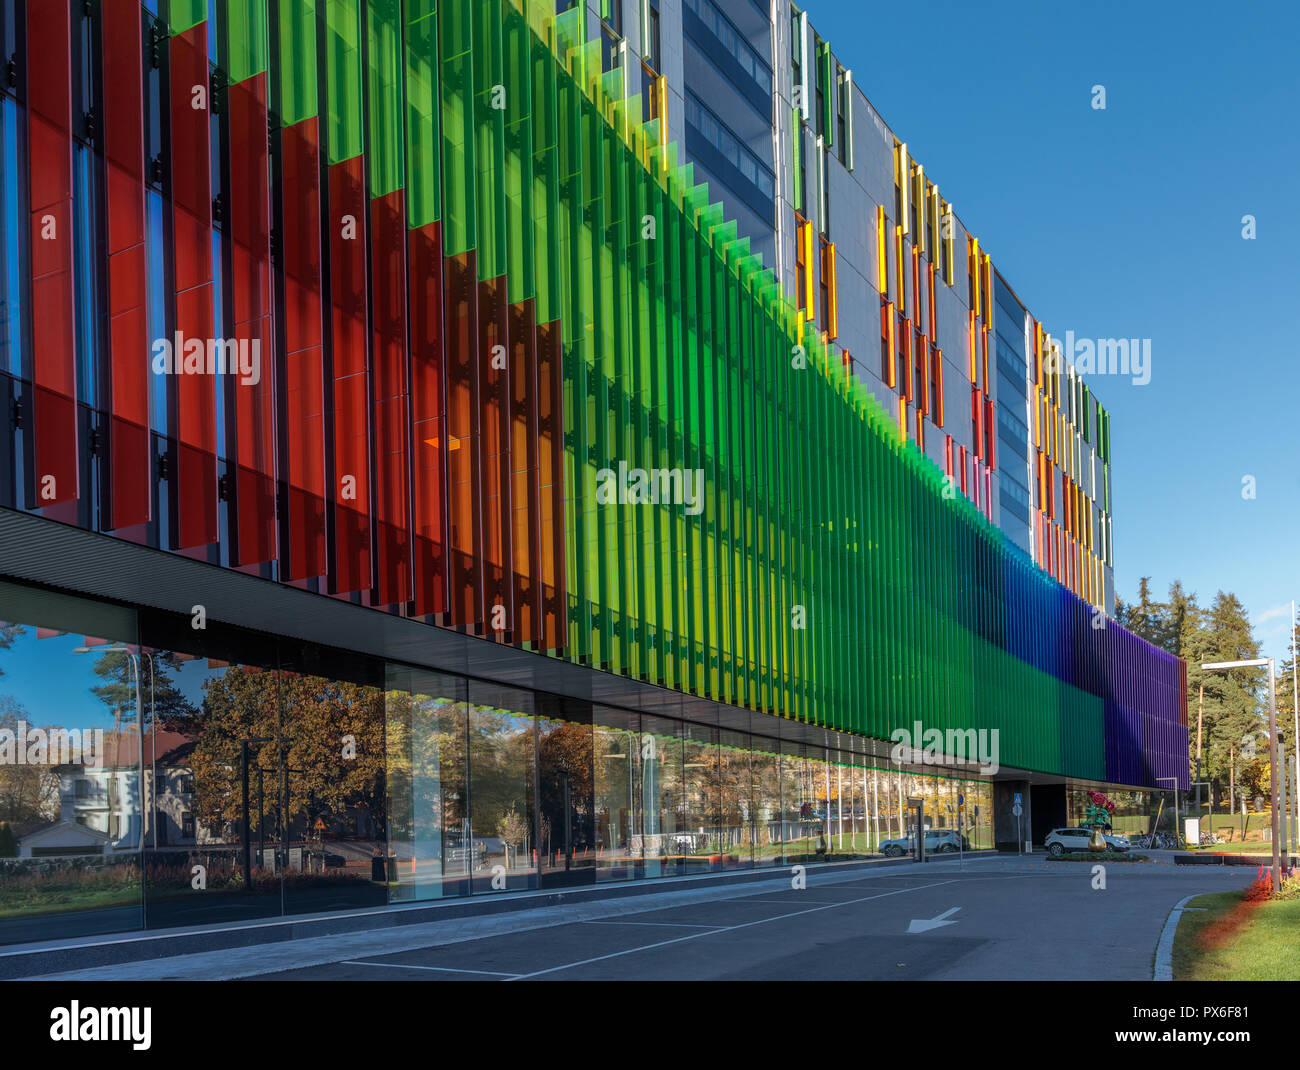 Helsinki New Children's Hospital opened for patients on 17 September 2018. The modern and practical building has colourful facade. Stock Photo